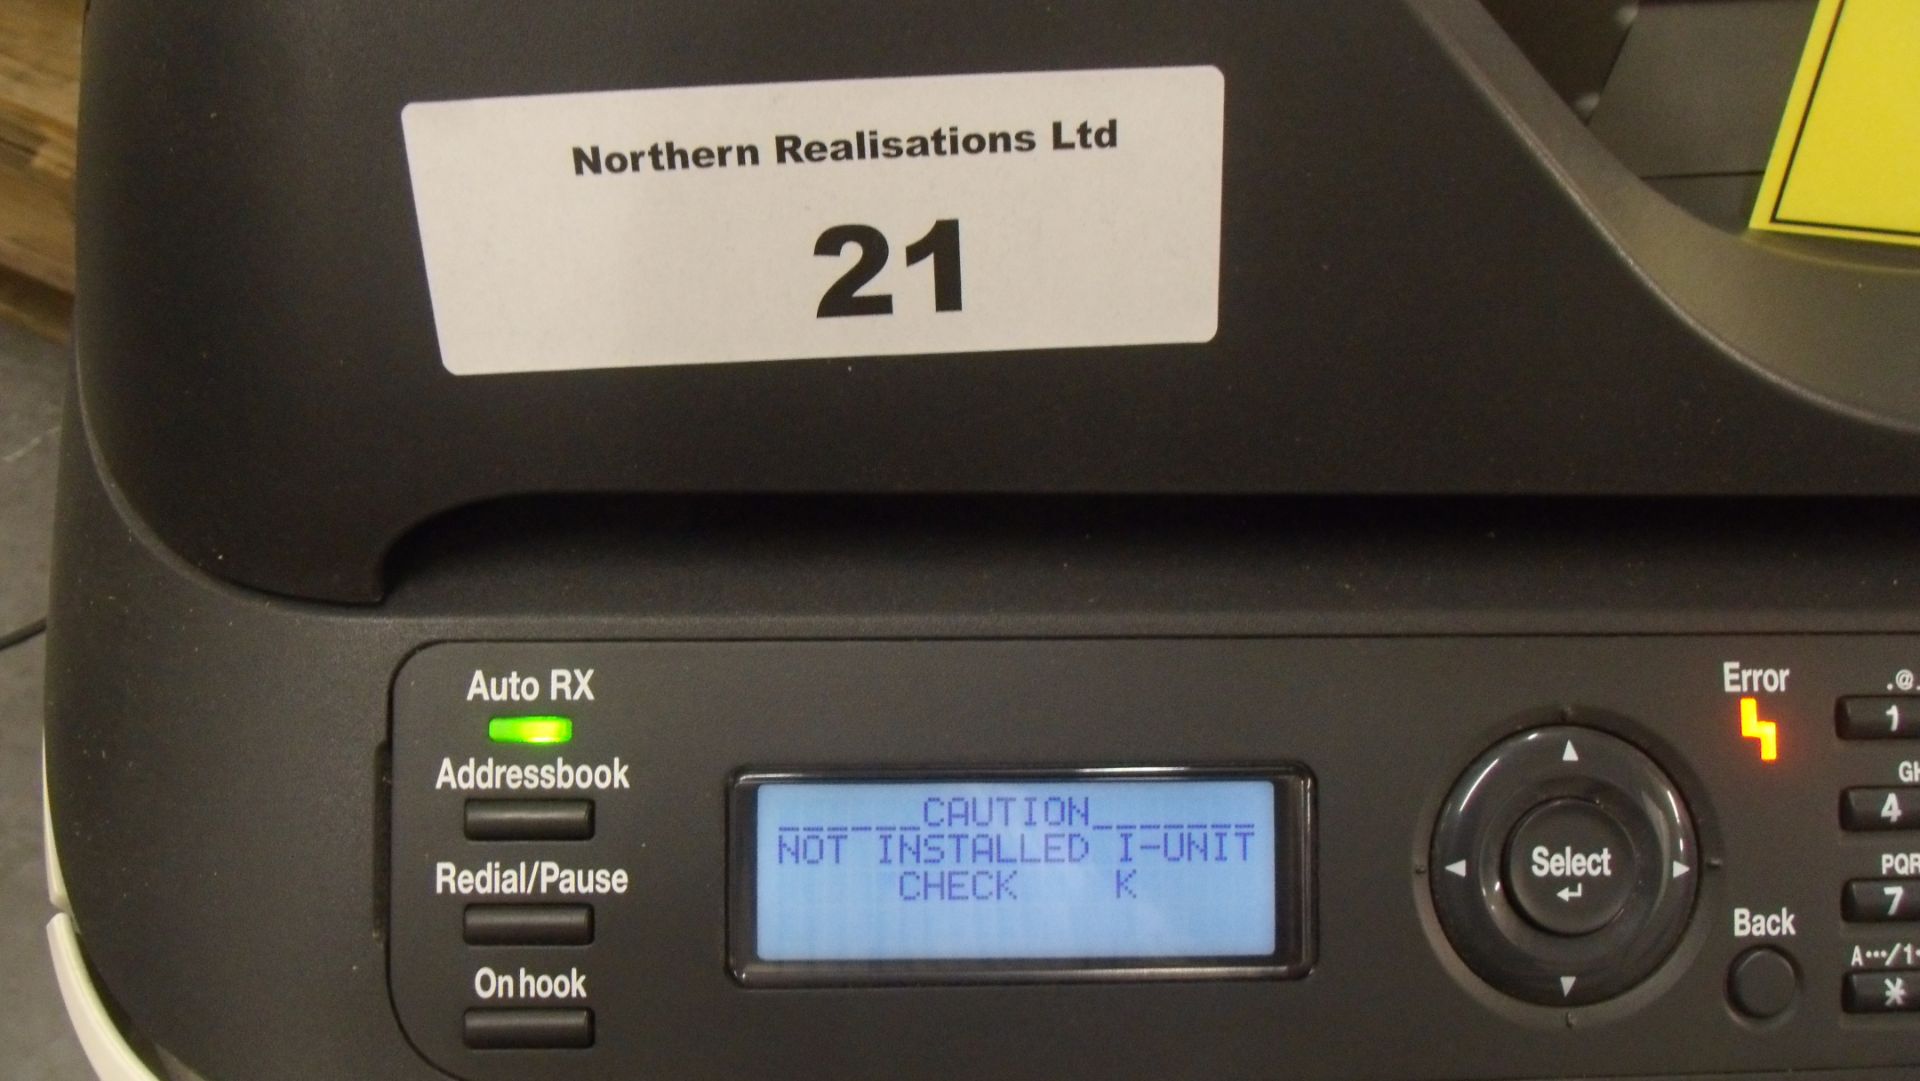 KONICA / MINOLTA BIZHUB C220 PRINTER IN CLEAN COSMETIC CONDITION BUT WITH ERROR MESSAGE SAYING I- - Image 2 of 2